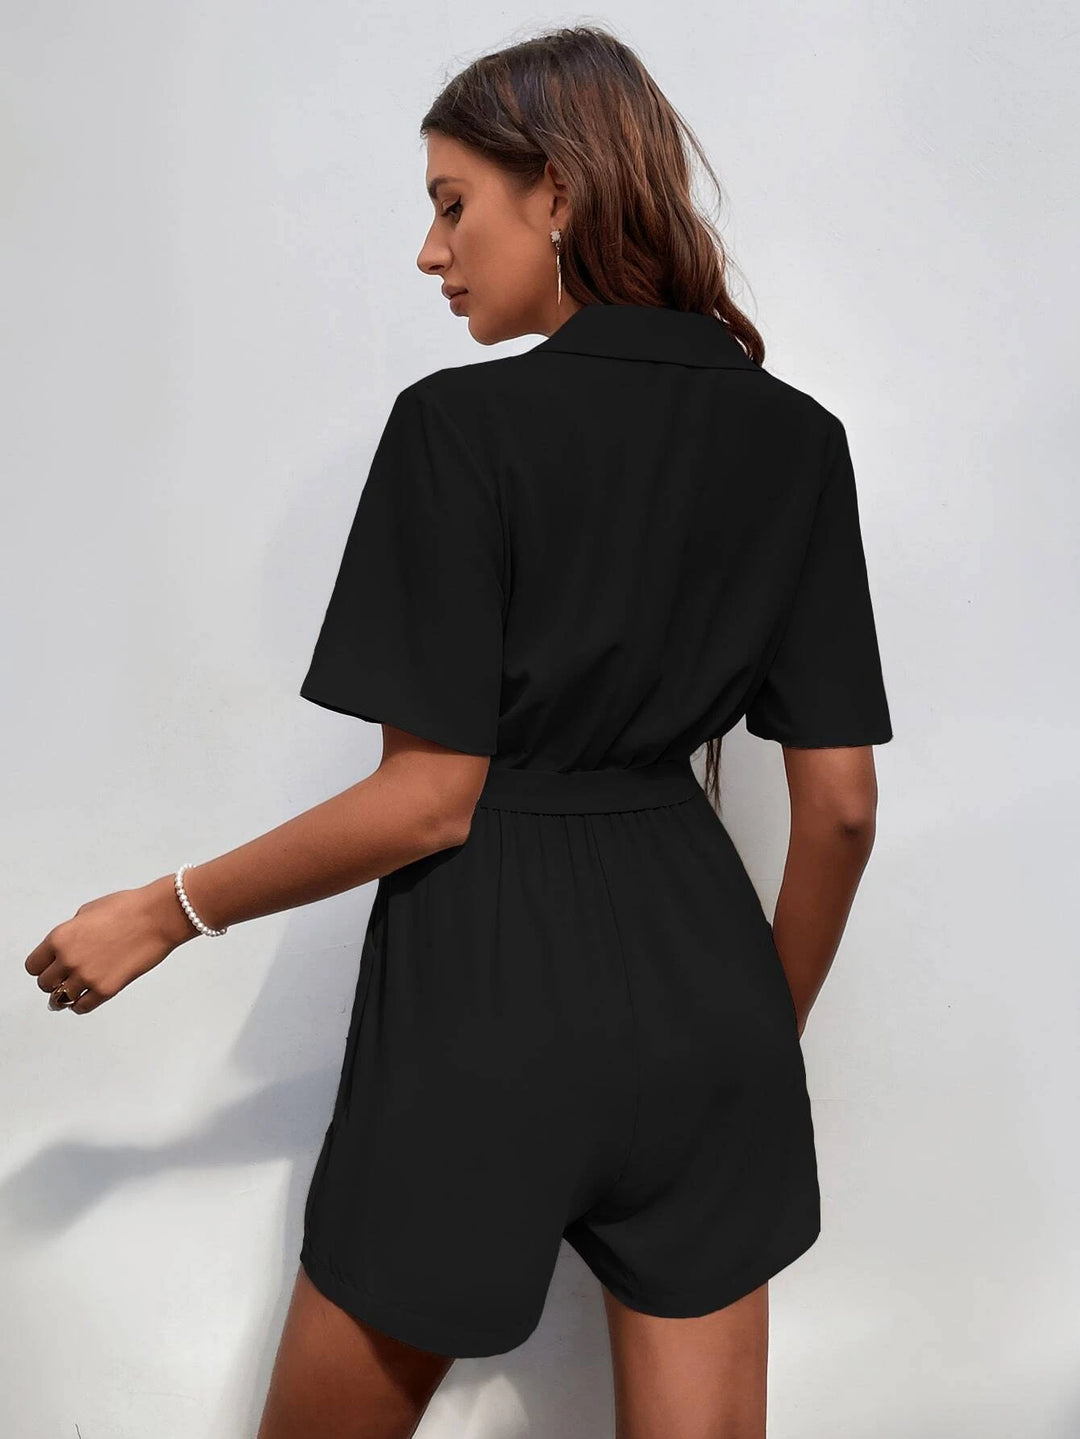 Belted Shirt Style Romper